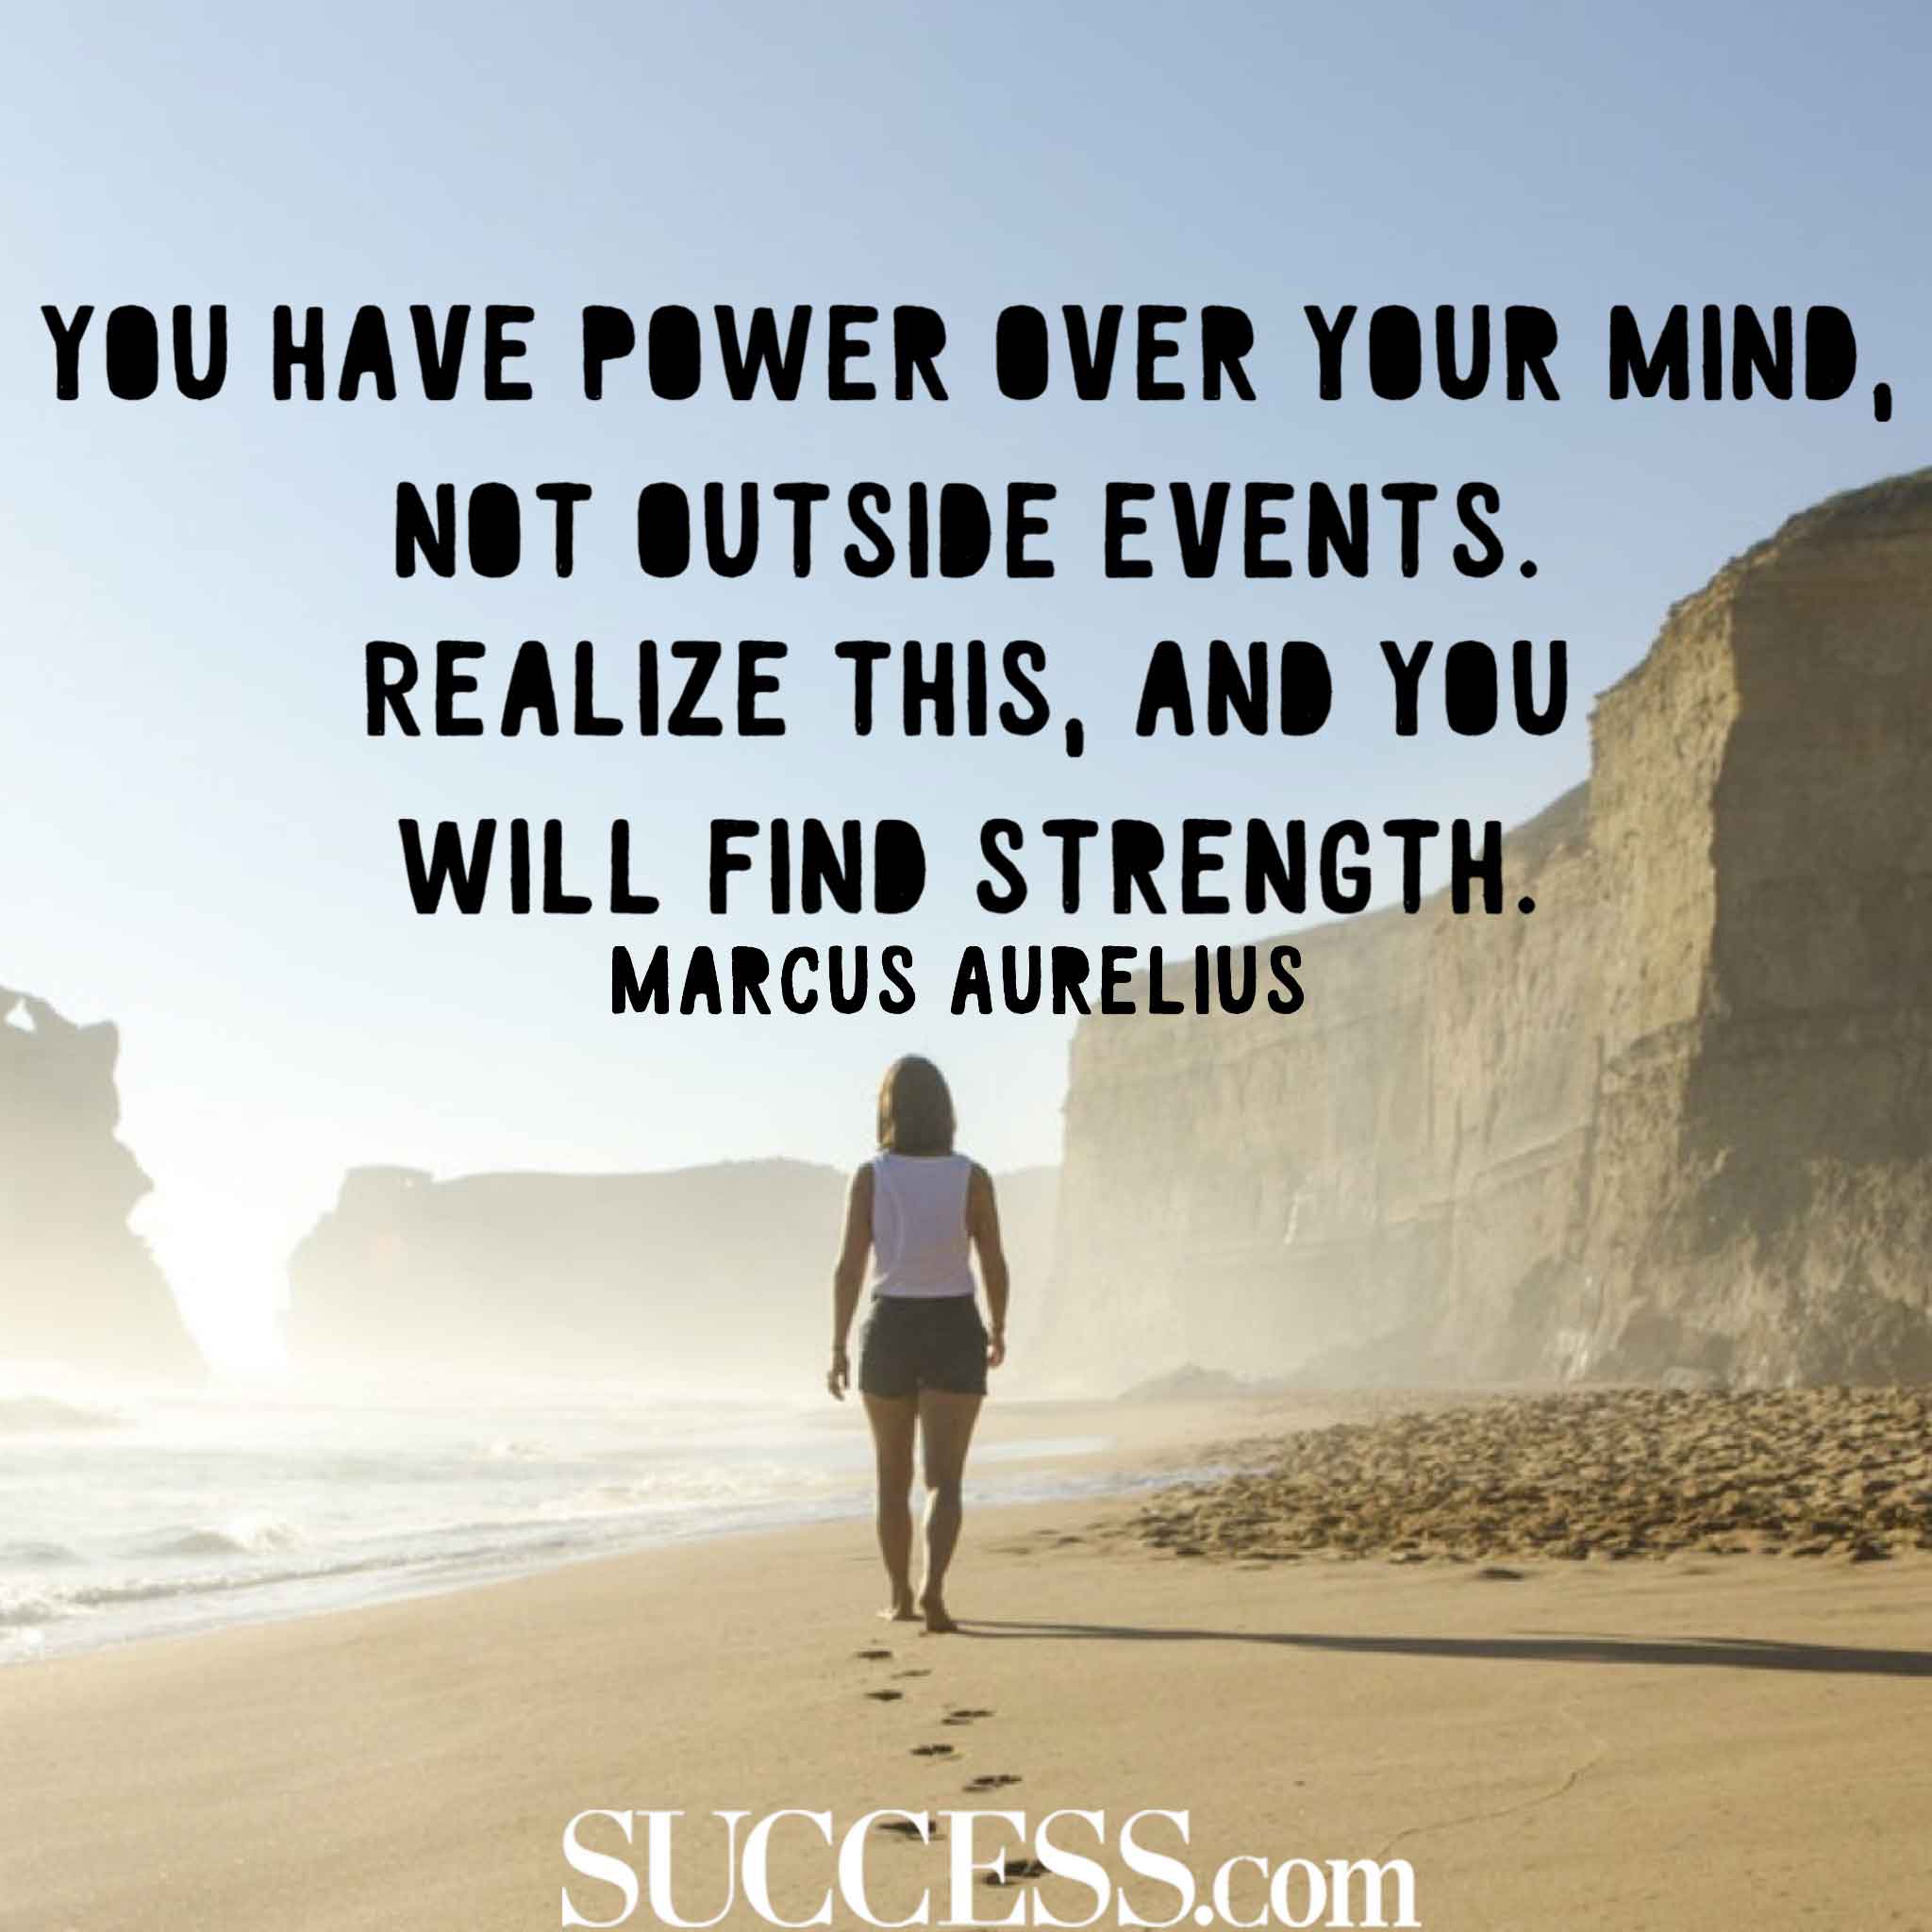 17 Powerful Quotes to Strengthen Your Mind